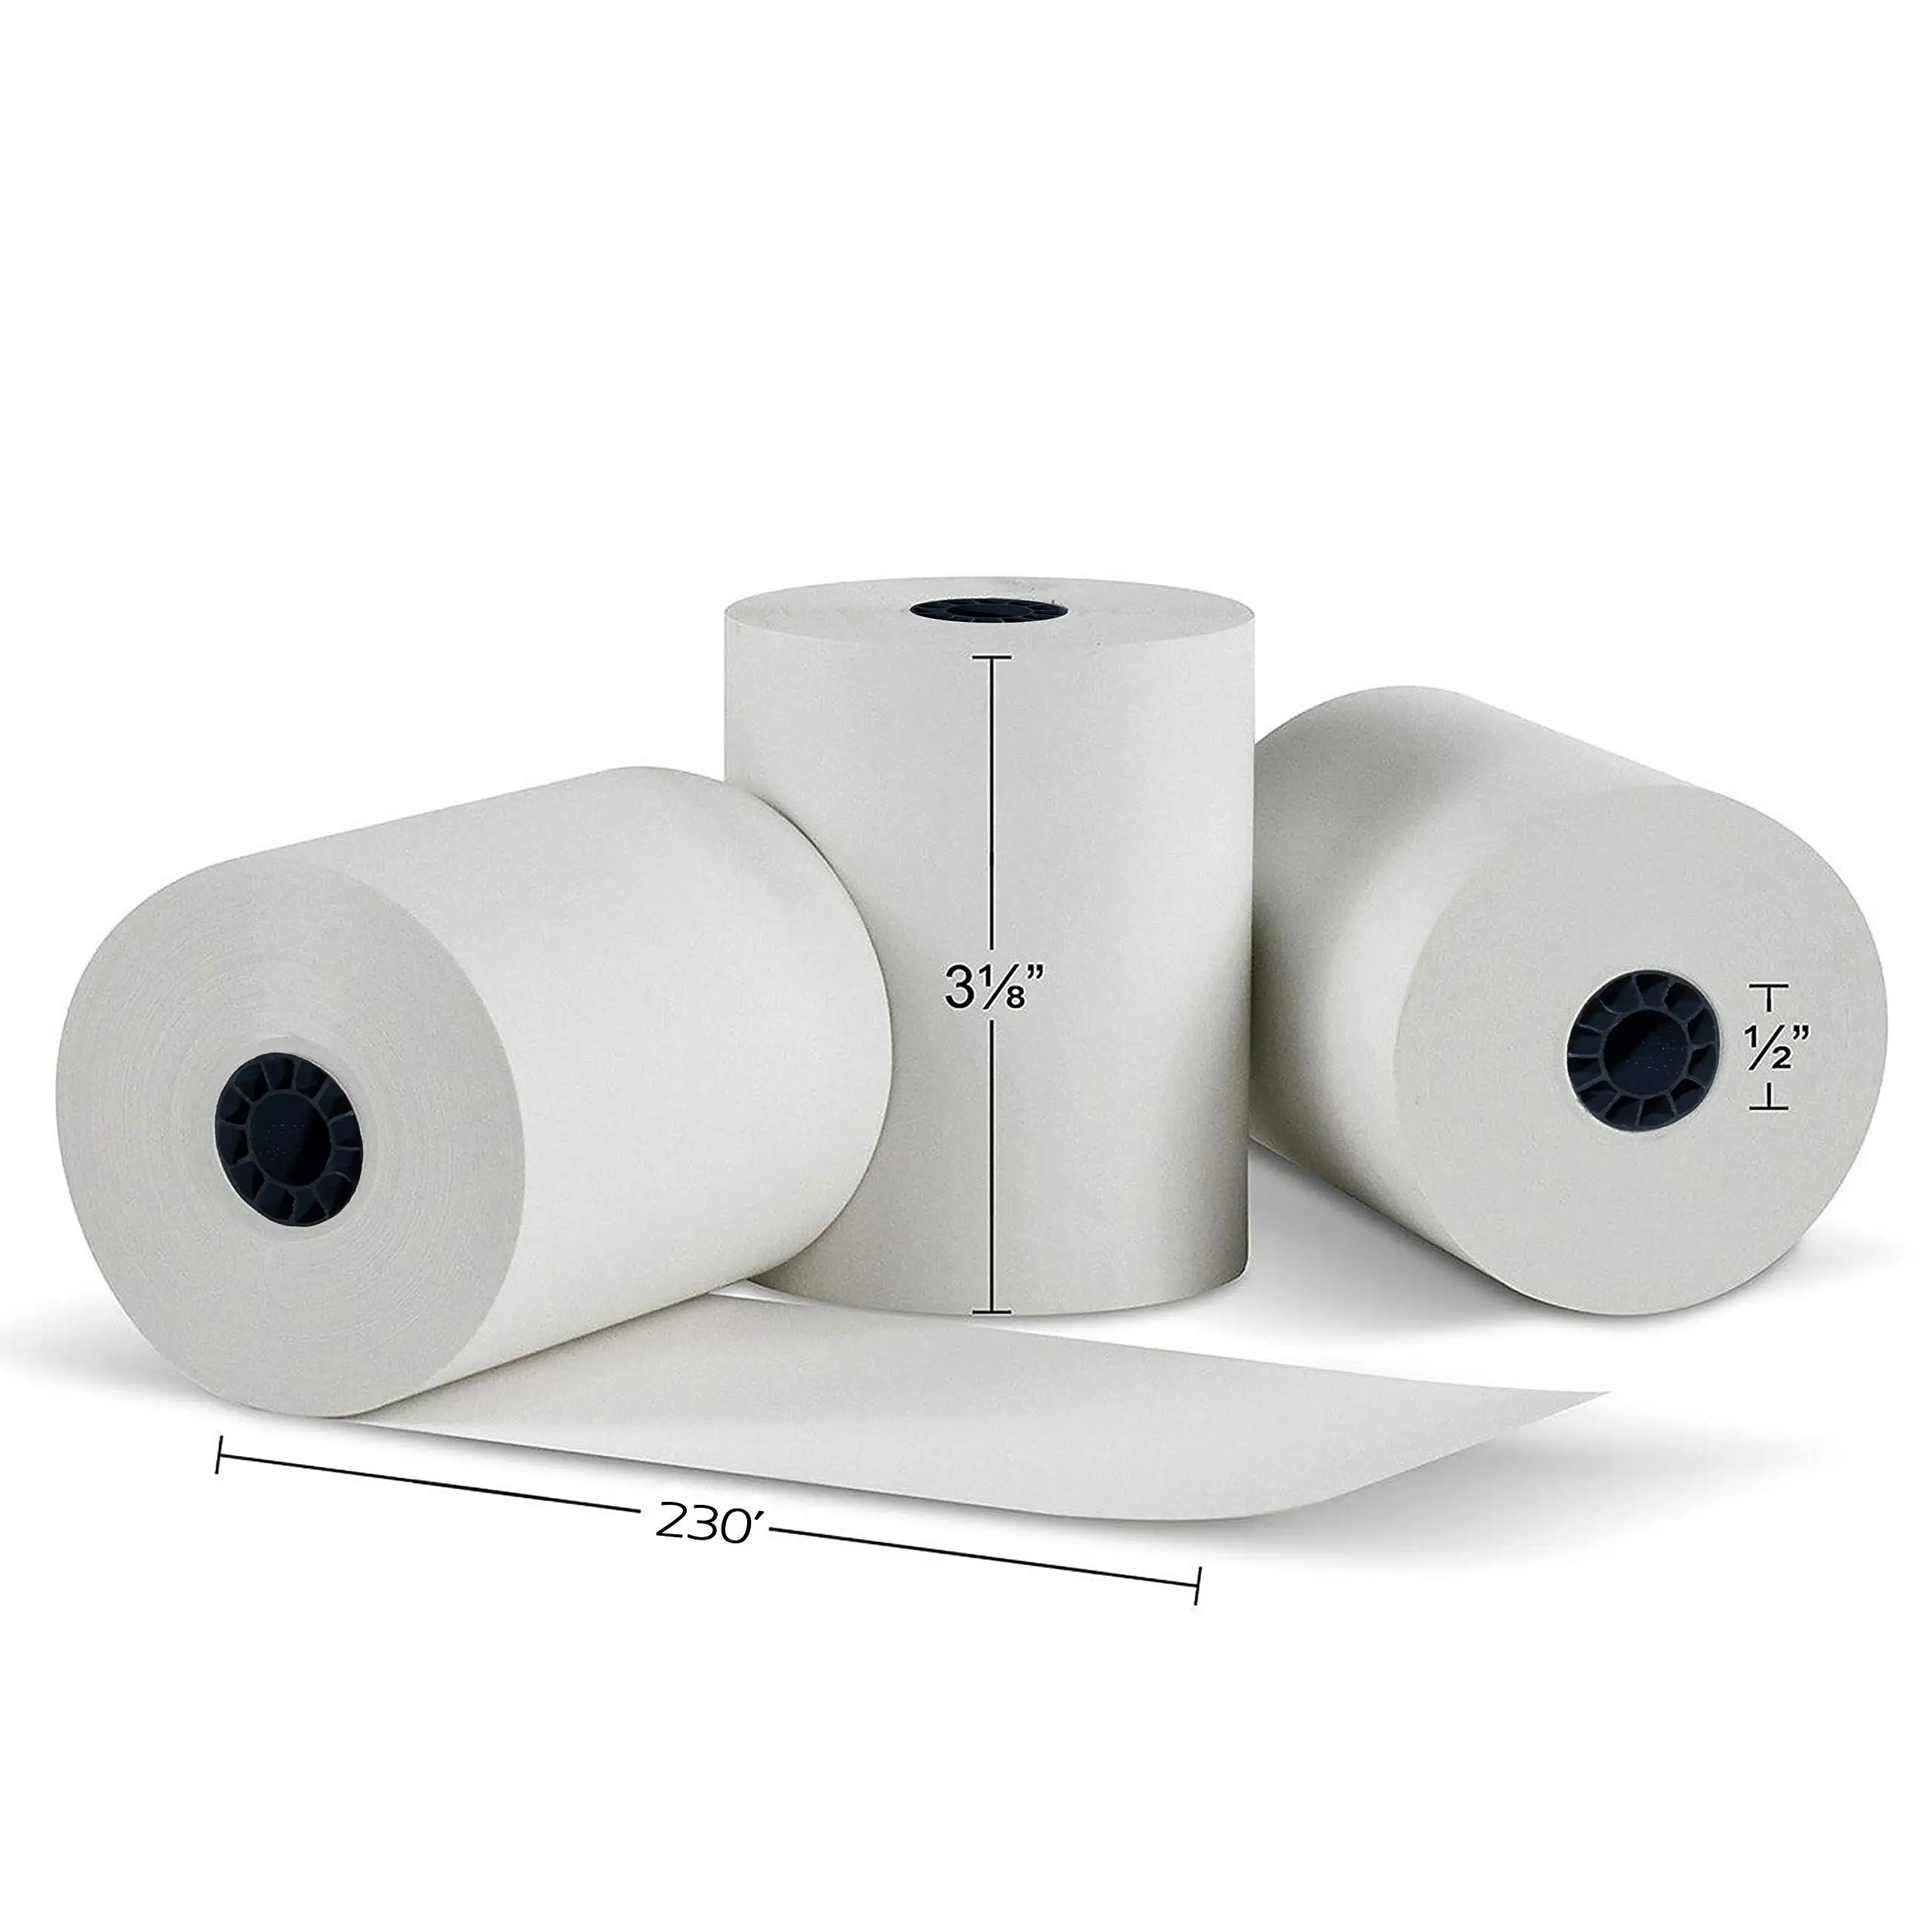 POS Cash Register Thermal Paper roll and Thermal Receipt Paper Wholesale suppliers